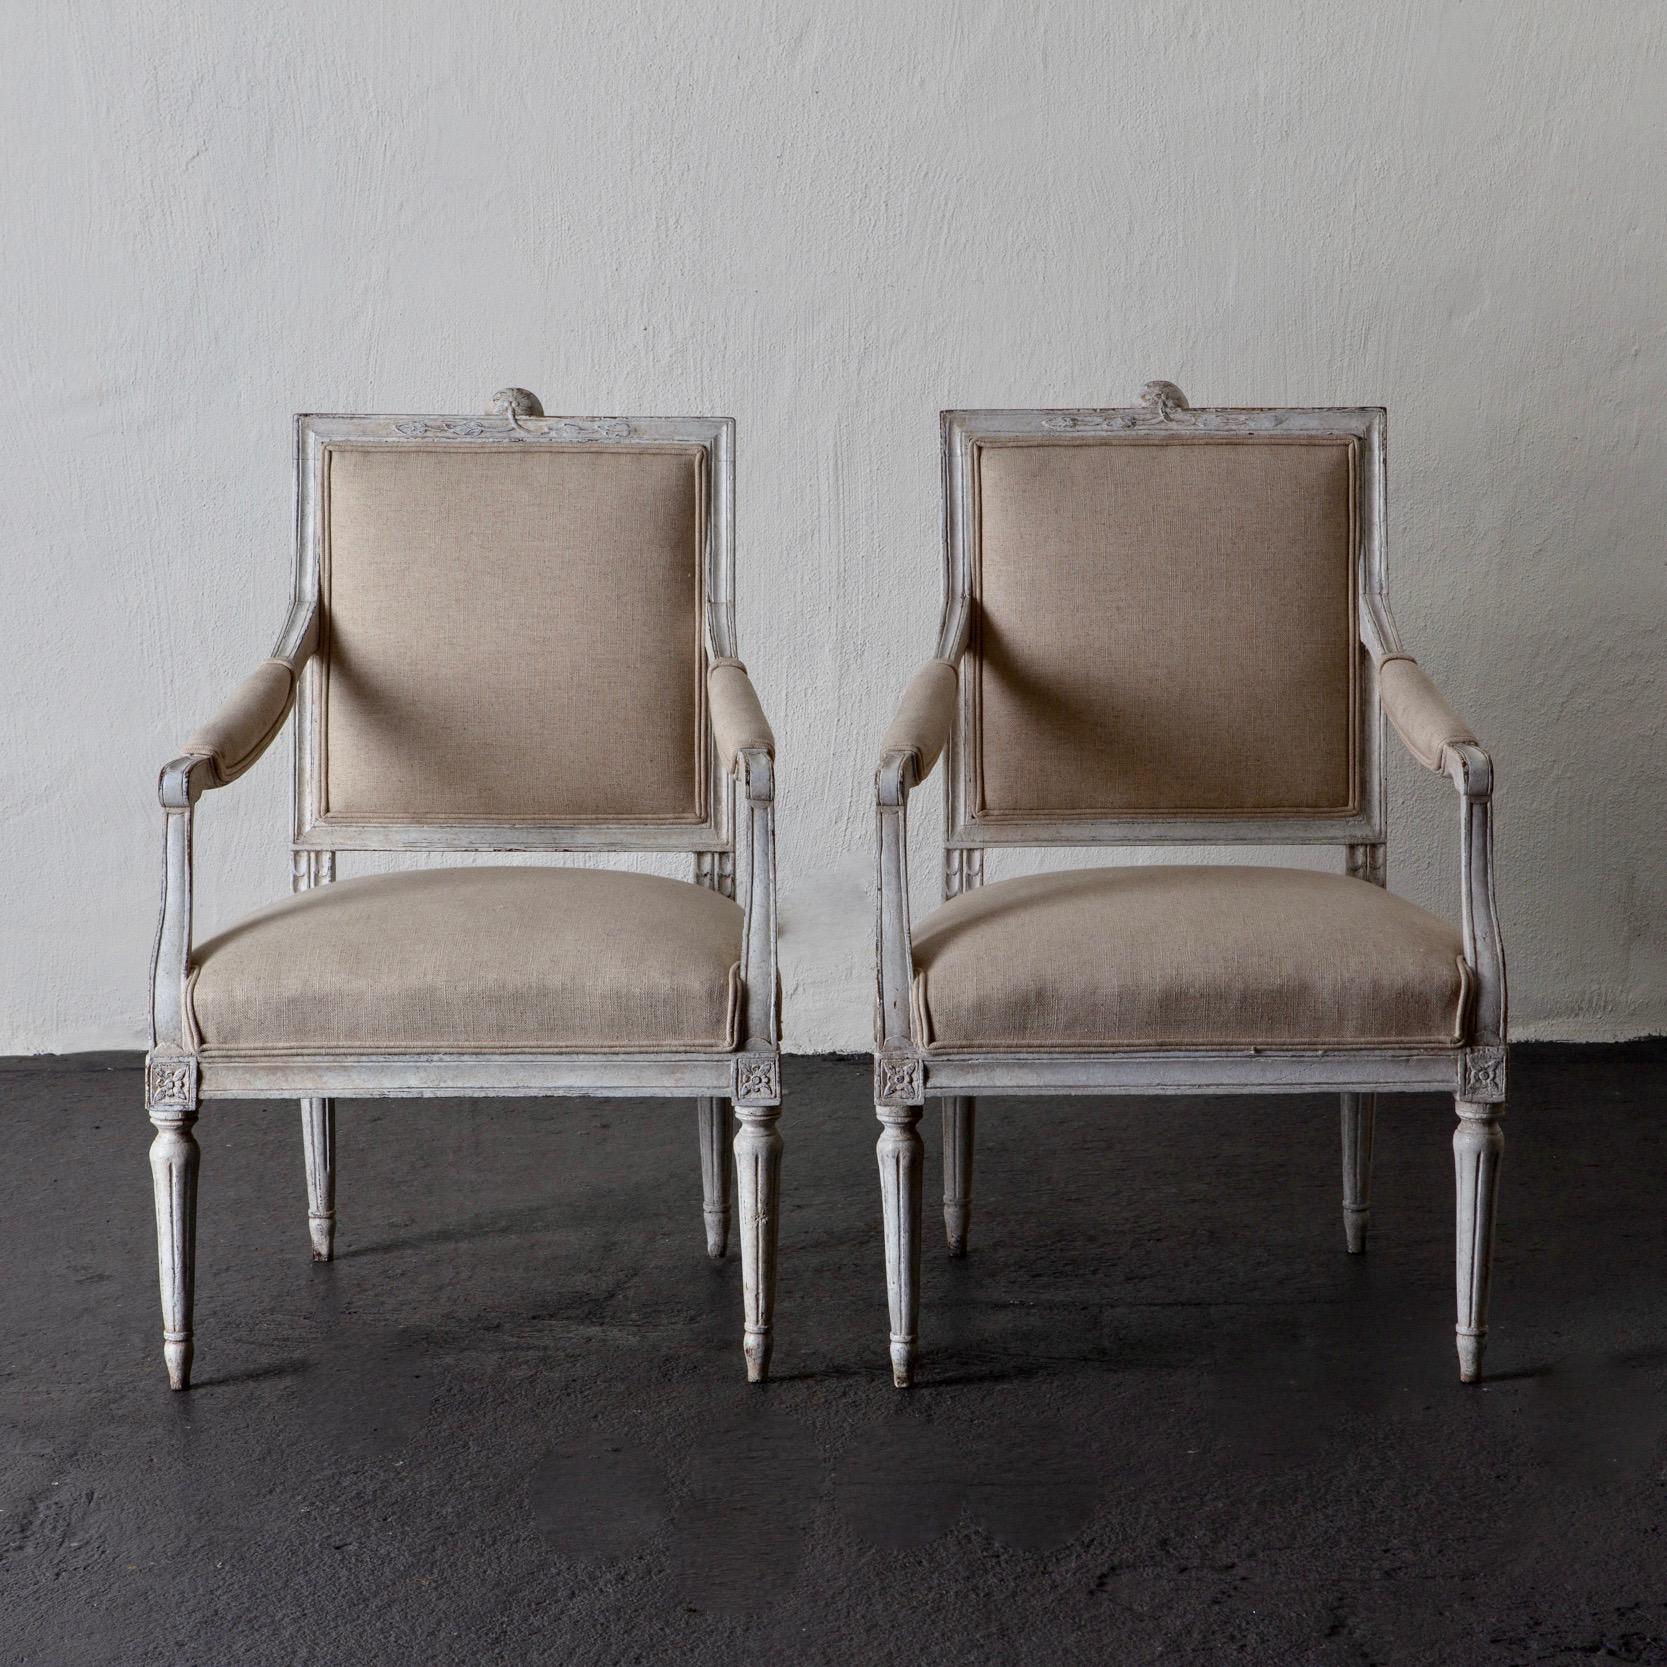 Armchairs pair of Swedish Gustavian, 1790-1810 white beige, Sweden. A pair of armchairs made during the Gustavian period in Sweden. The wooden frame painted in a distressed white finish. Beautiful carvings. Upholstered in a beige linen fabric.